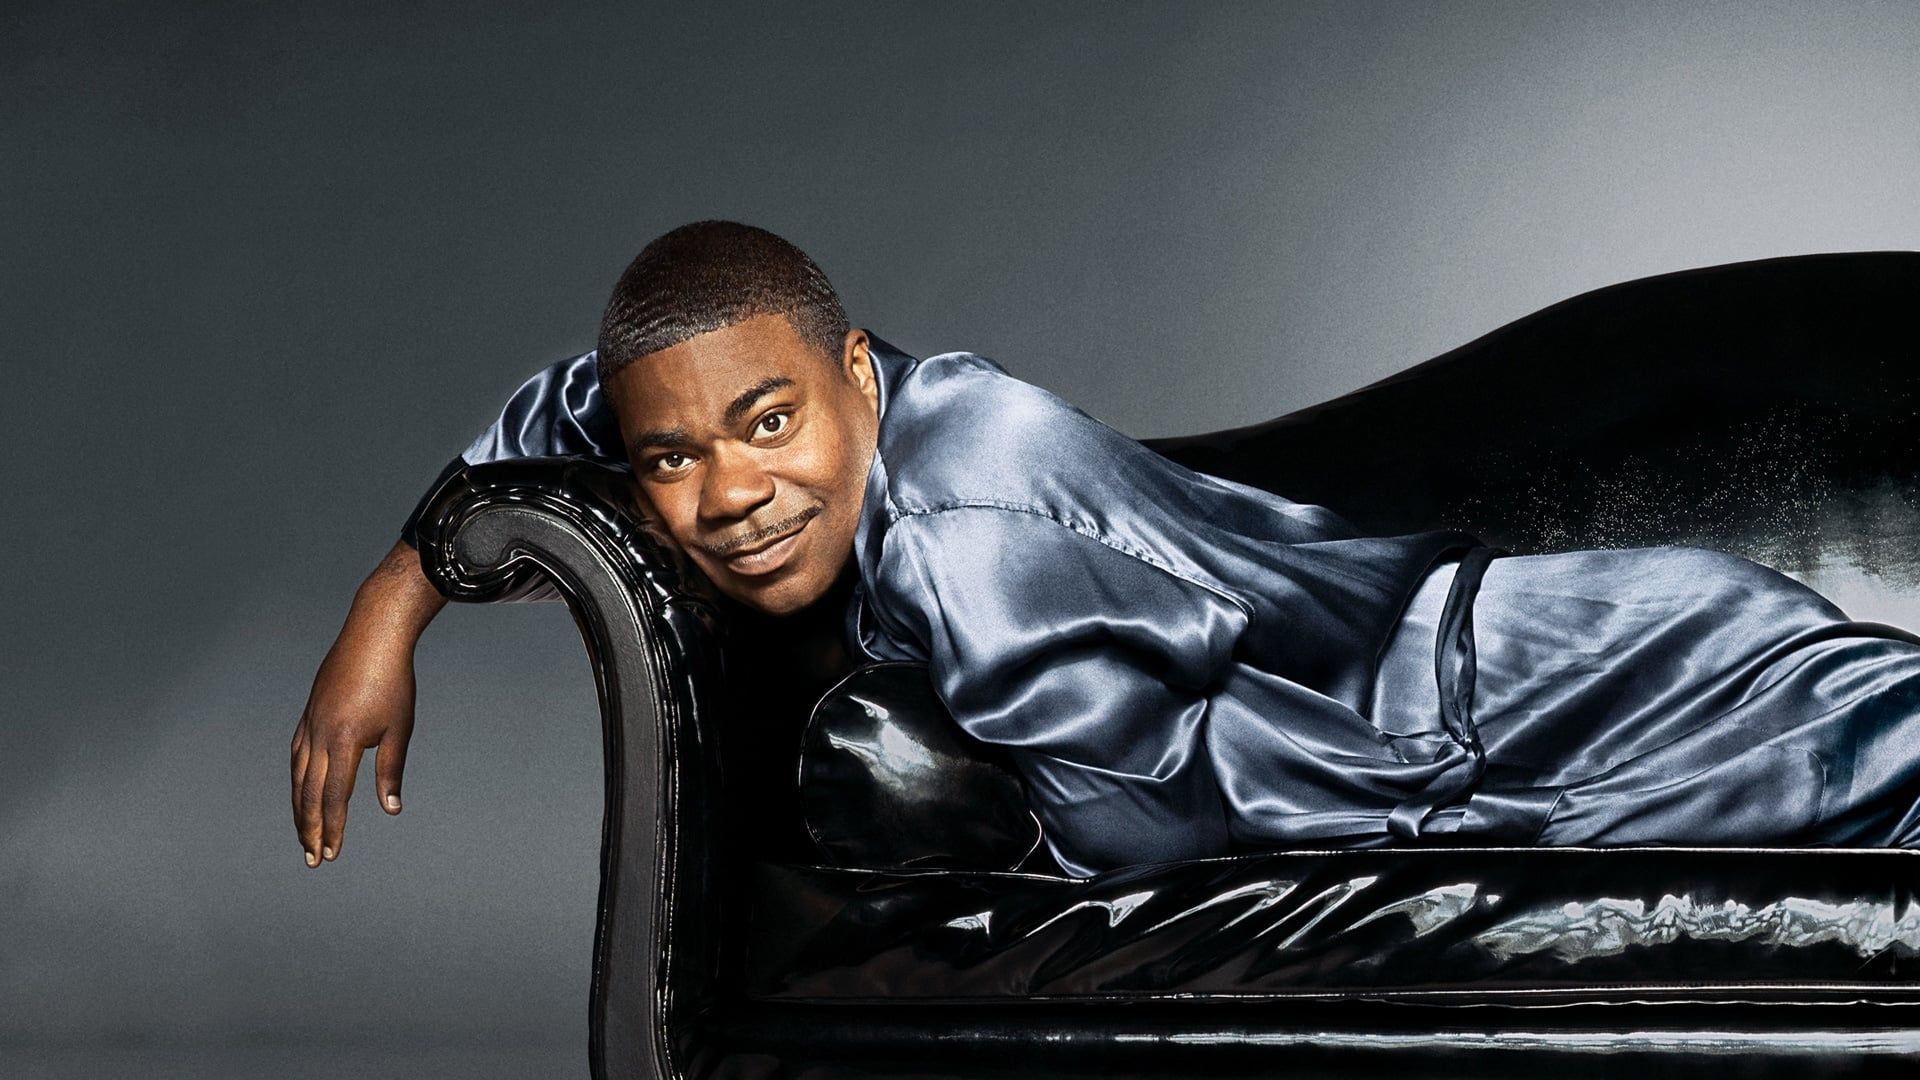 Tracy Morgan: Black and Blue background